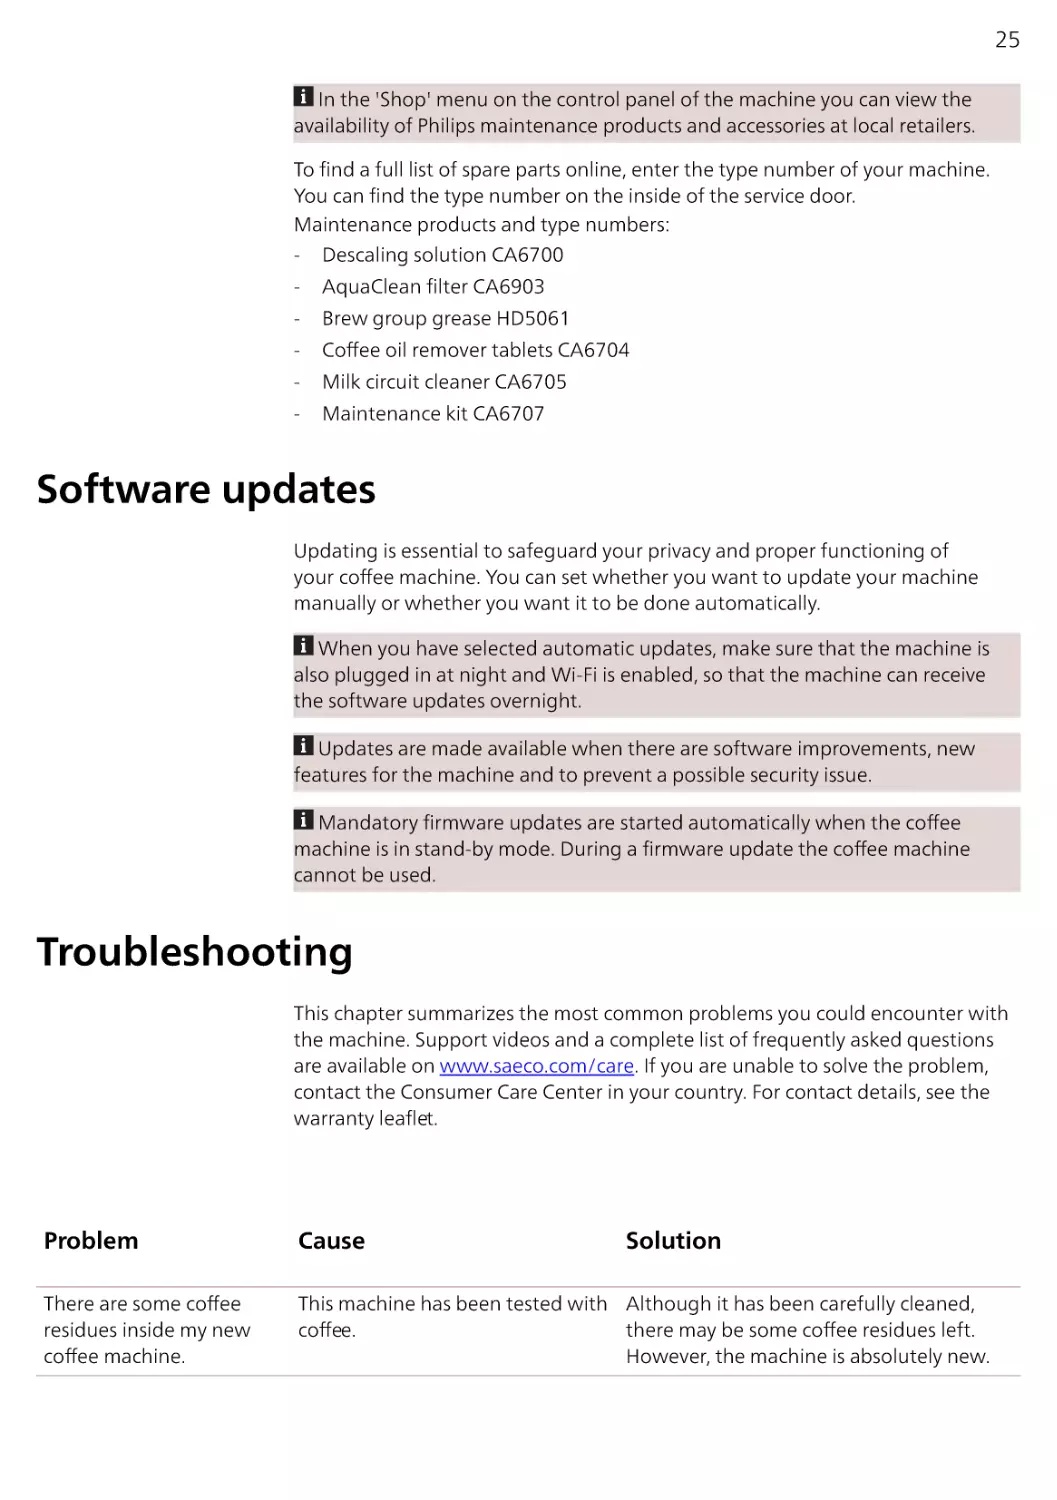 Software updates
Troubleshooting